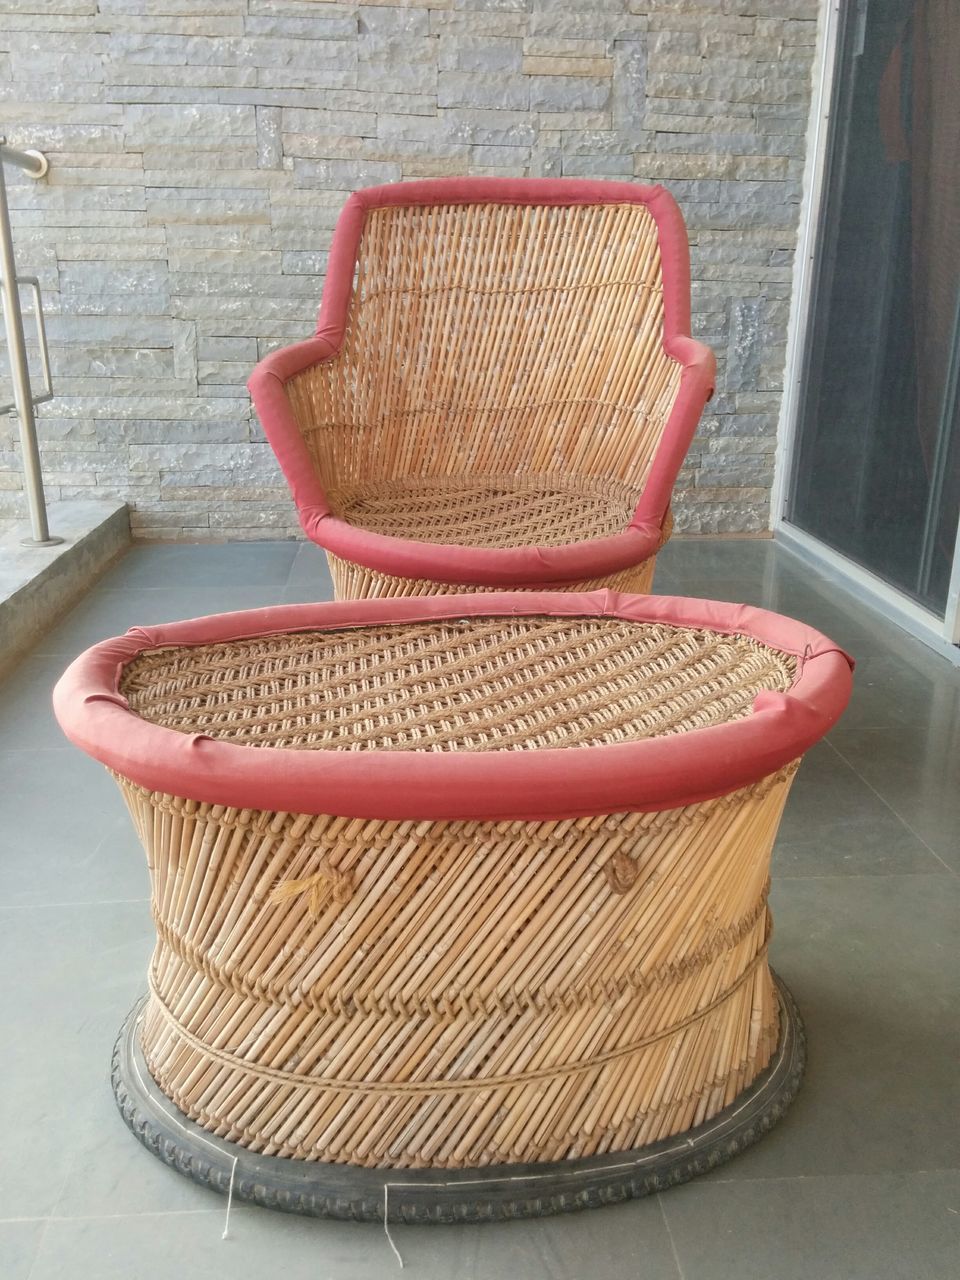 CLOSE-UP OF WICKER BASKET IN ROOM